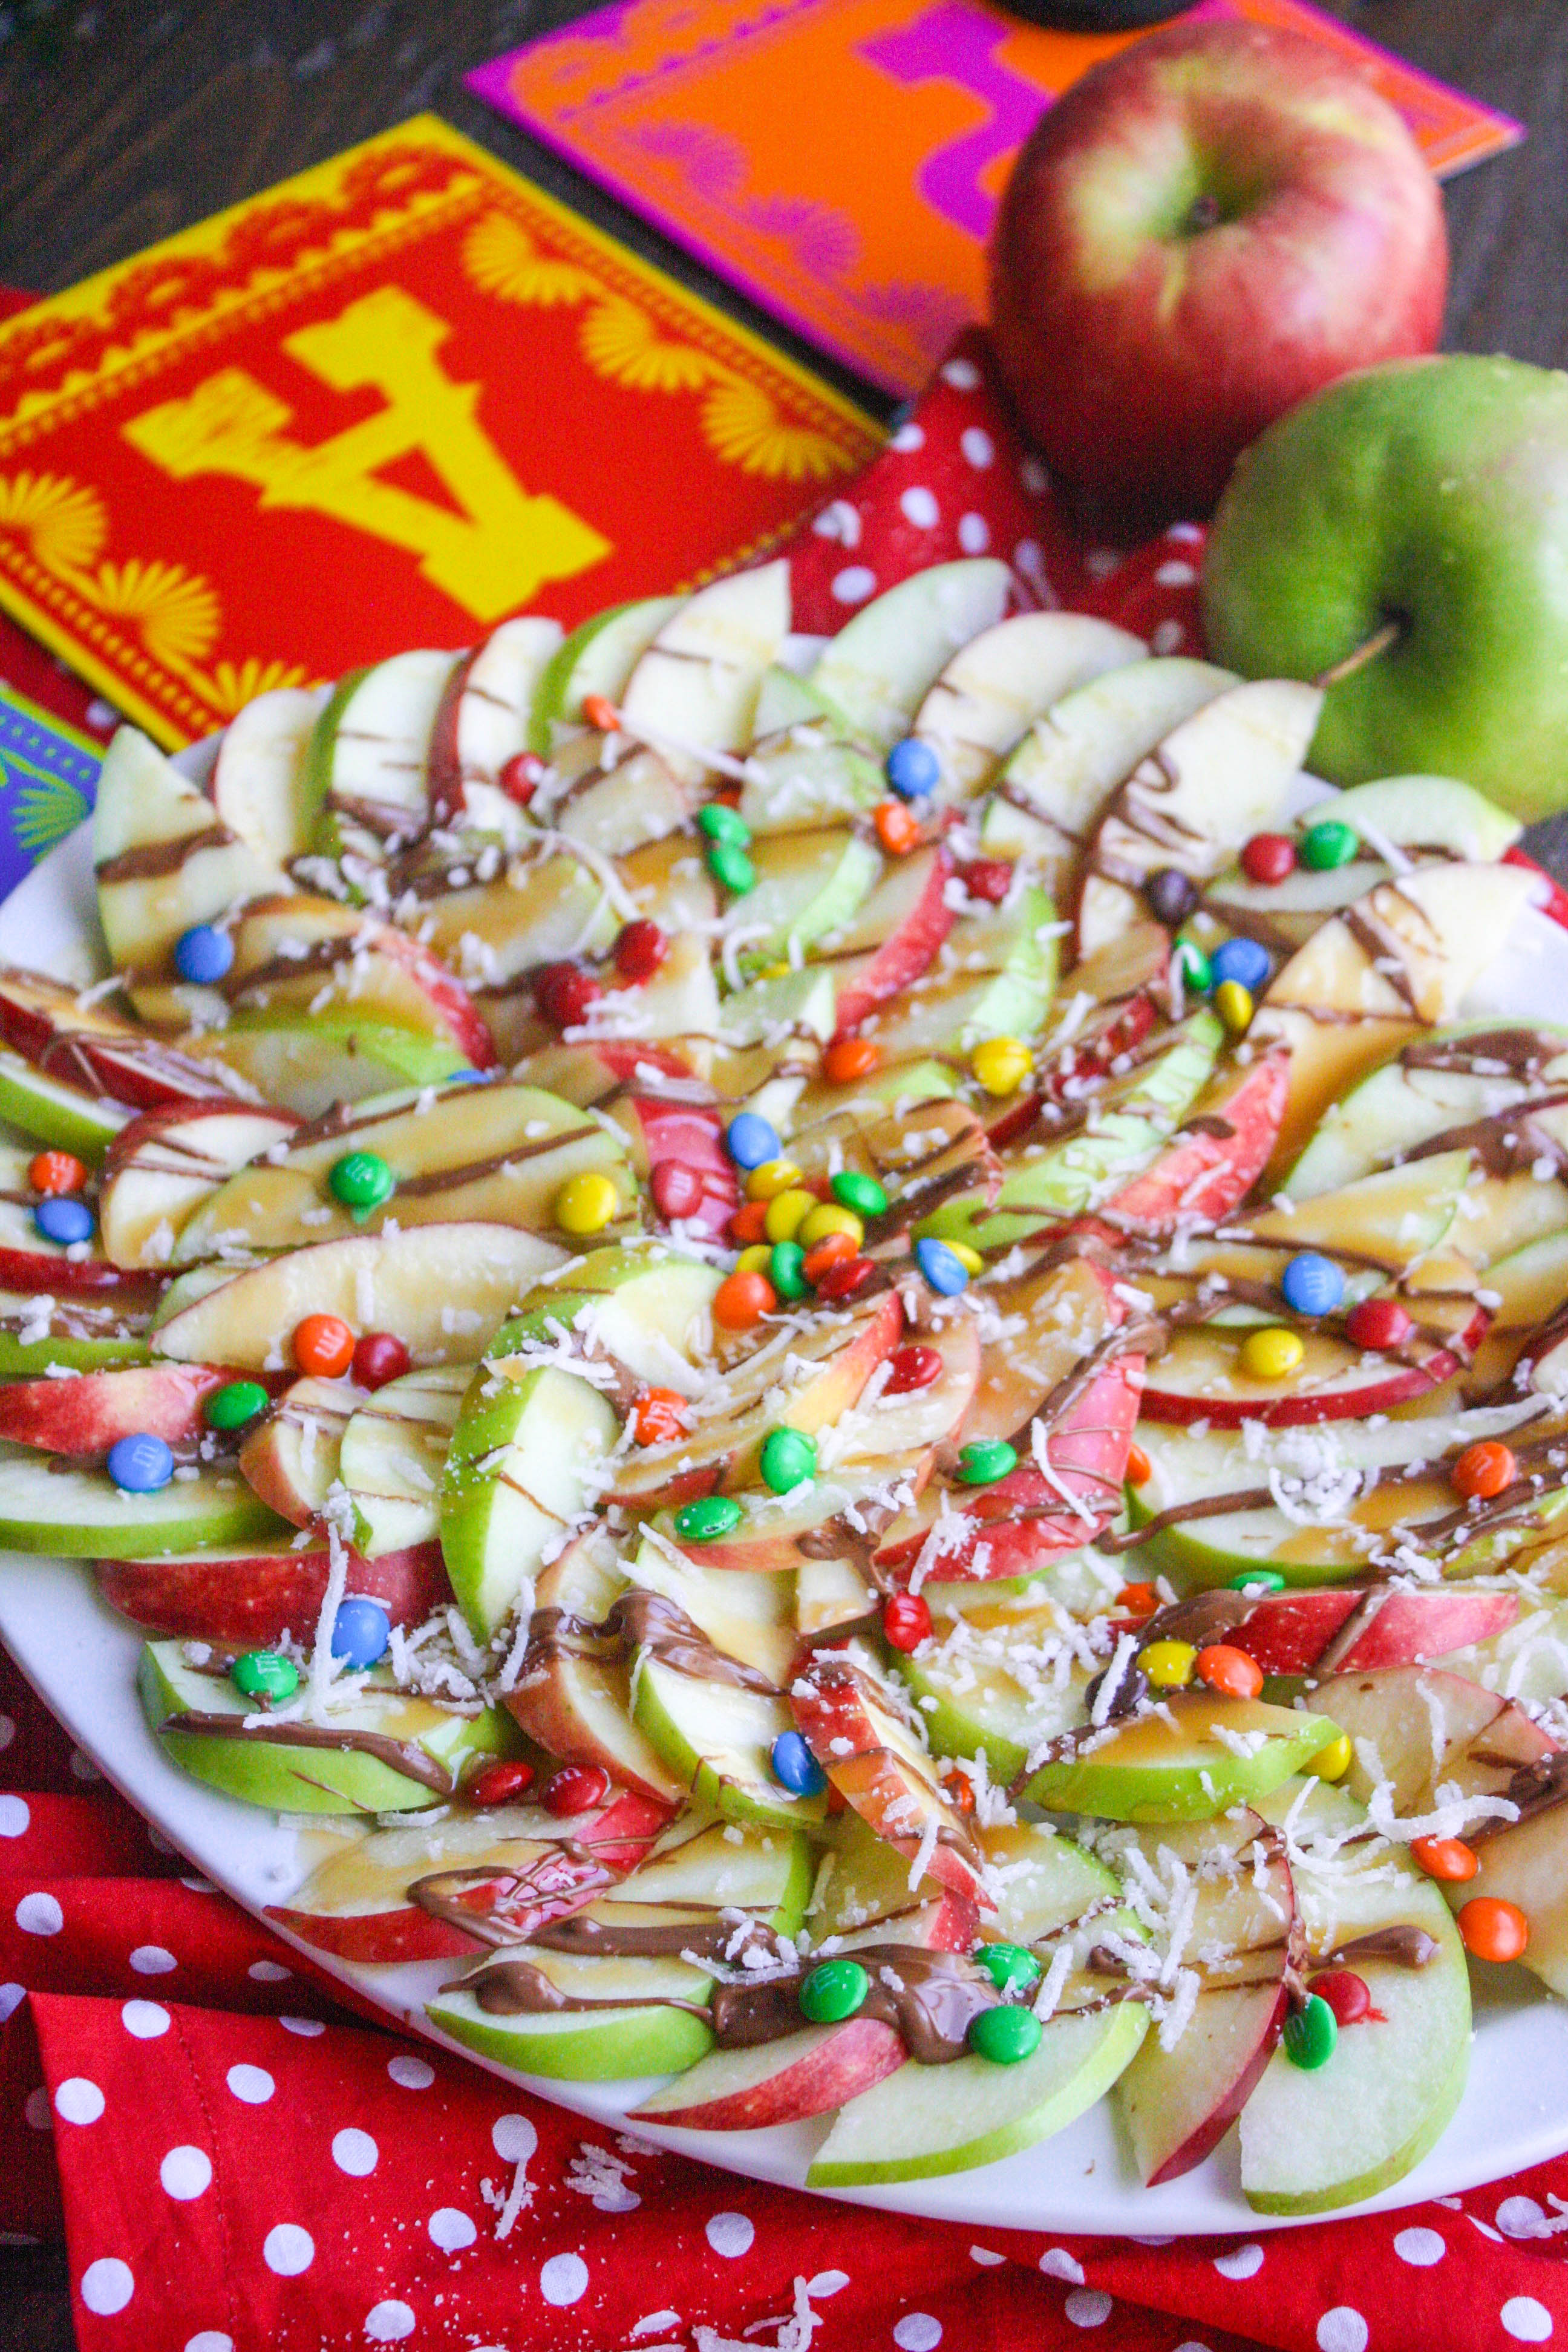 Apple nachos with chocolate & caramel drizzle are so fun to serve for a special treat!